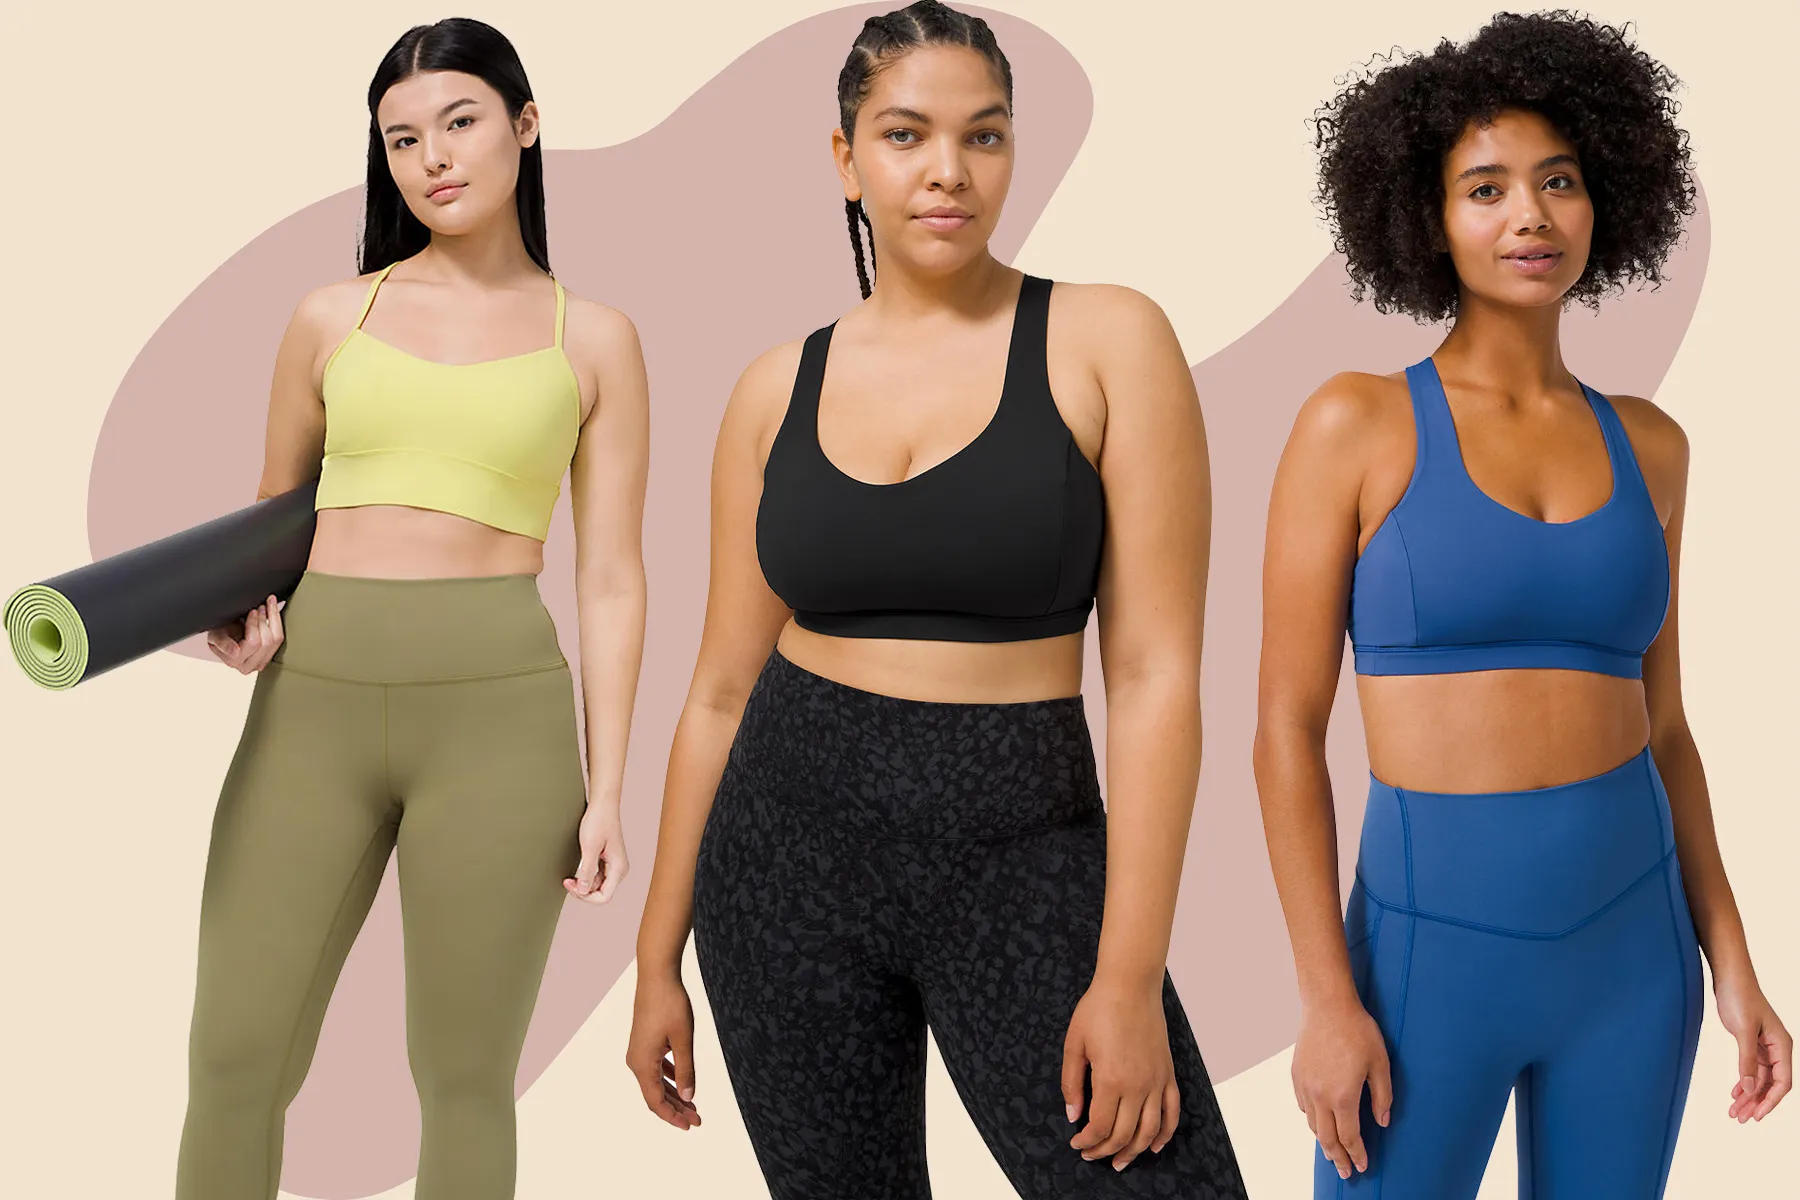 “Activewear for Wellness: How Fitness Apparel Supports a Healthy Lifestyle”